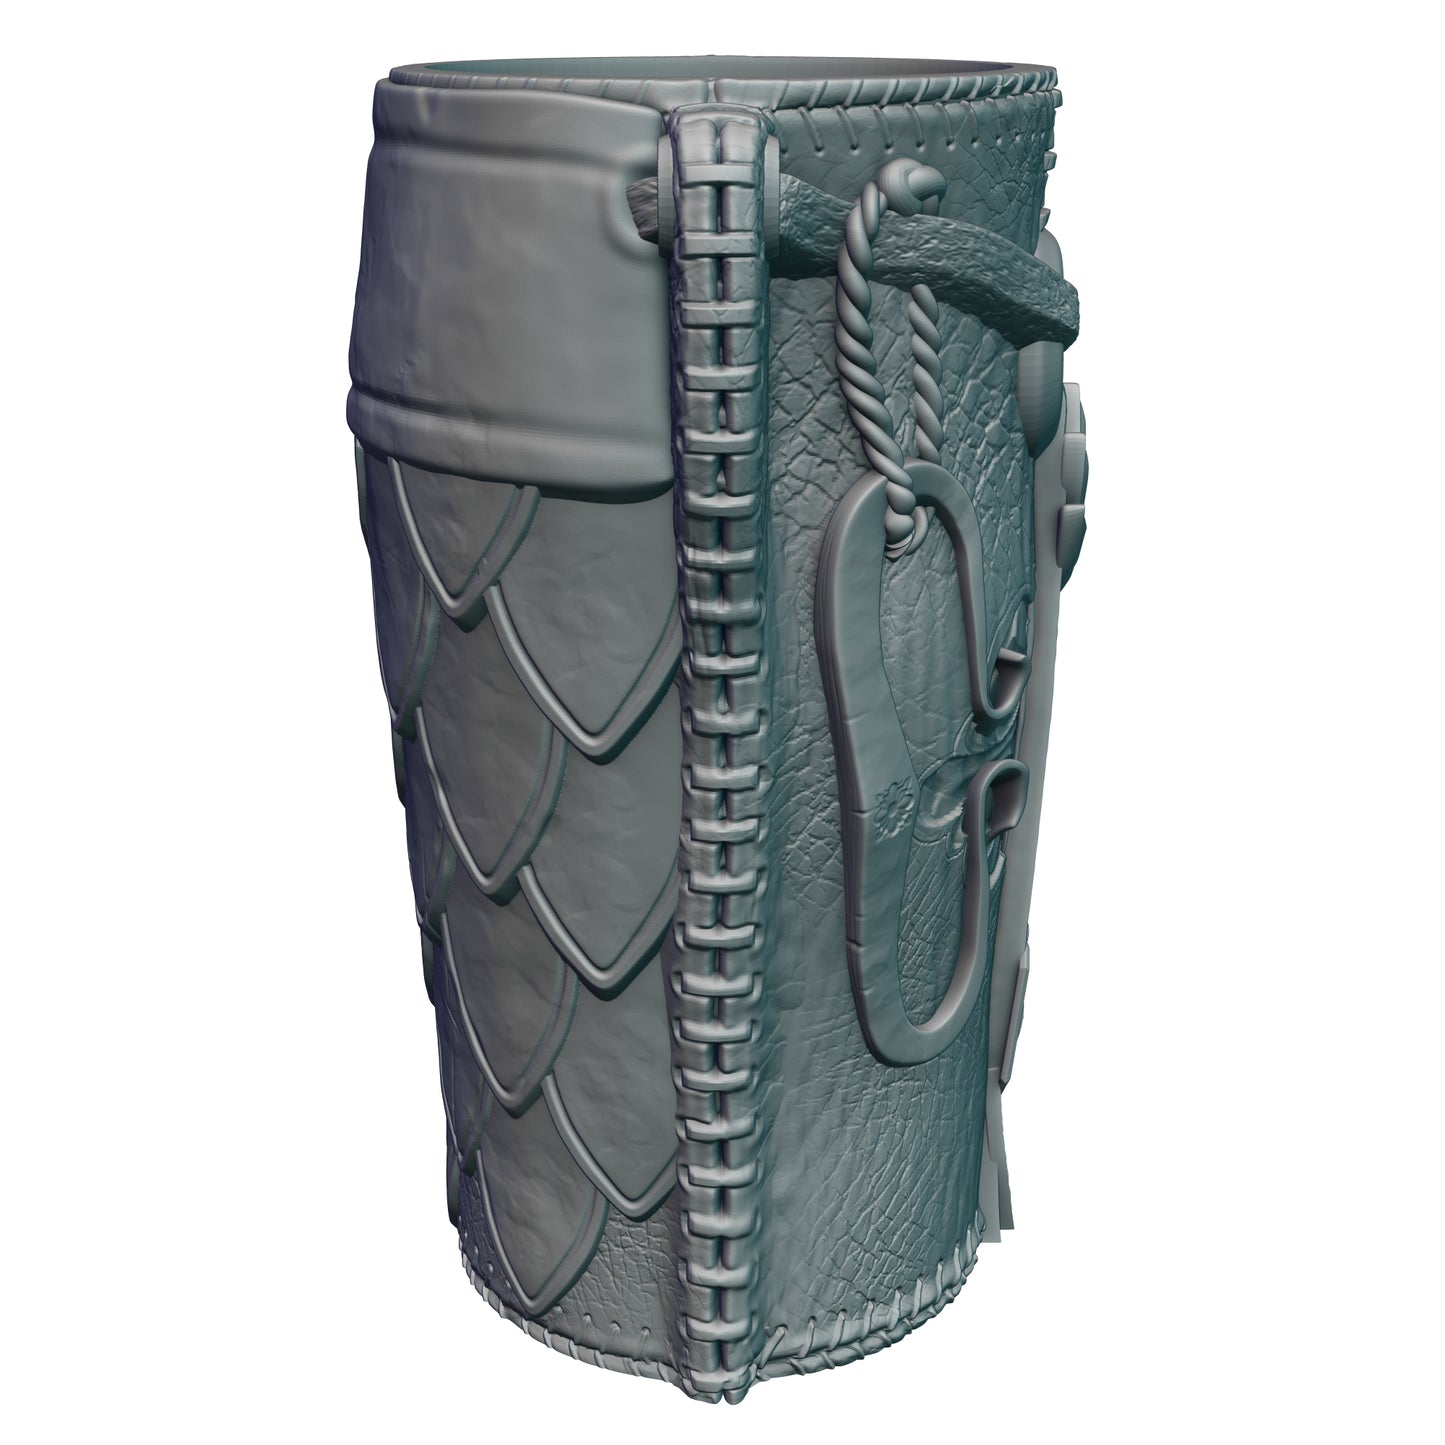 Ranger Gaming Mug with Twist-Off Cover: Dual-Purpose Dice and Beverage Can Holder